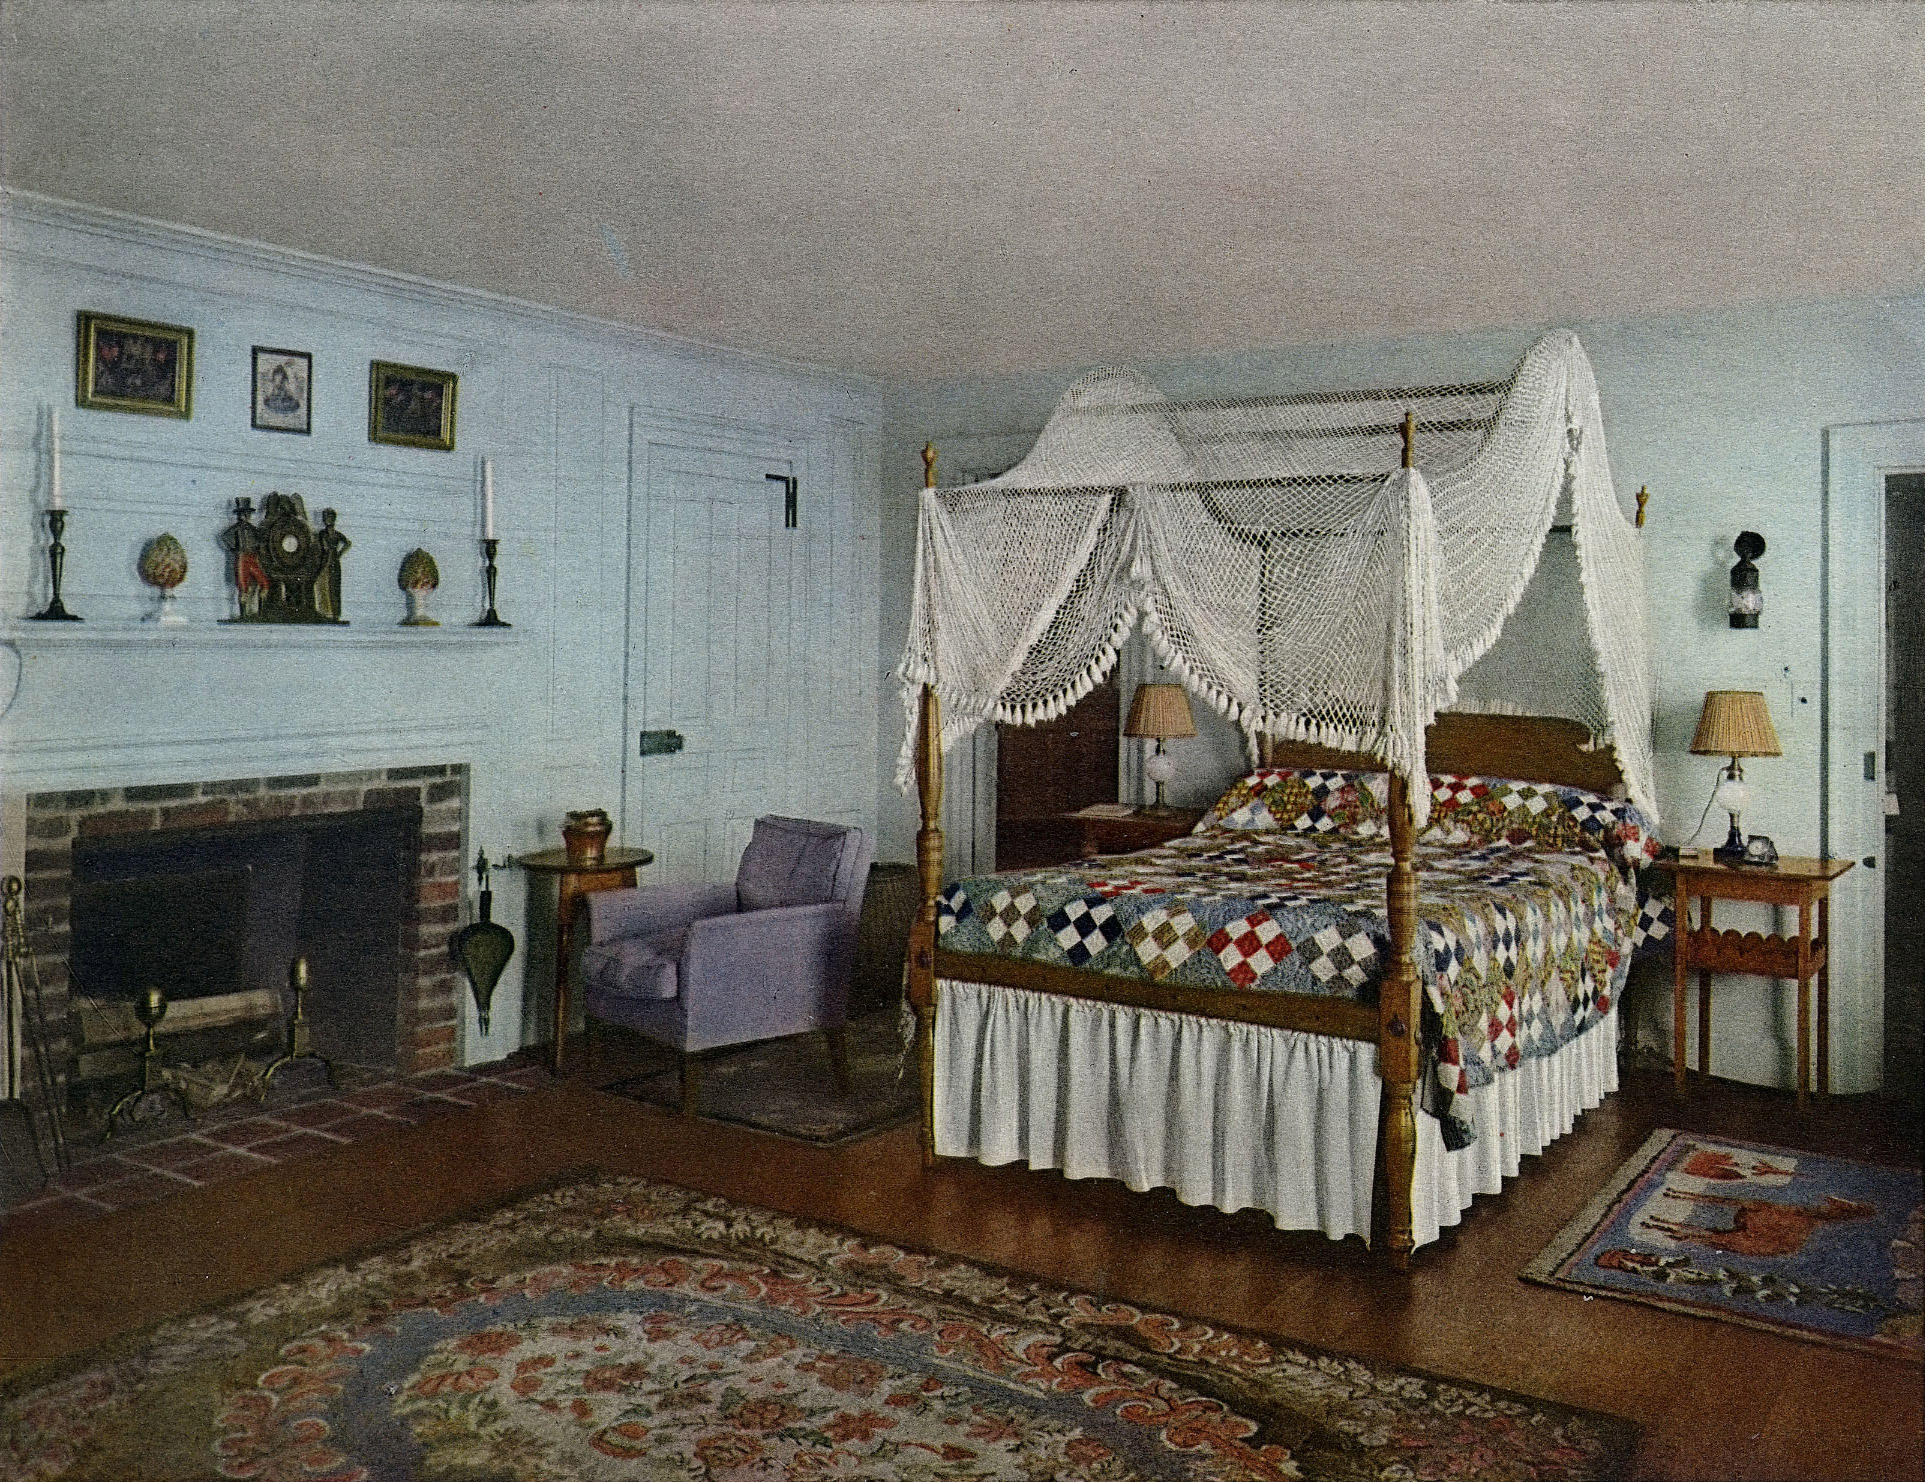 Bedroom, Chestertown House, 1927